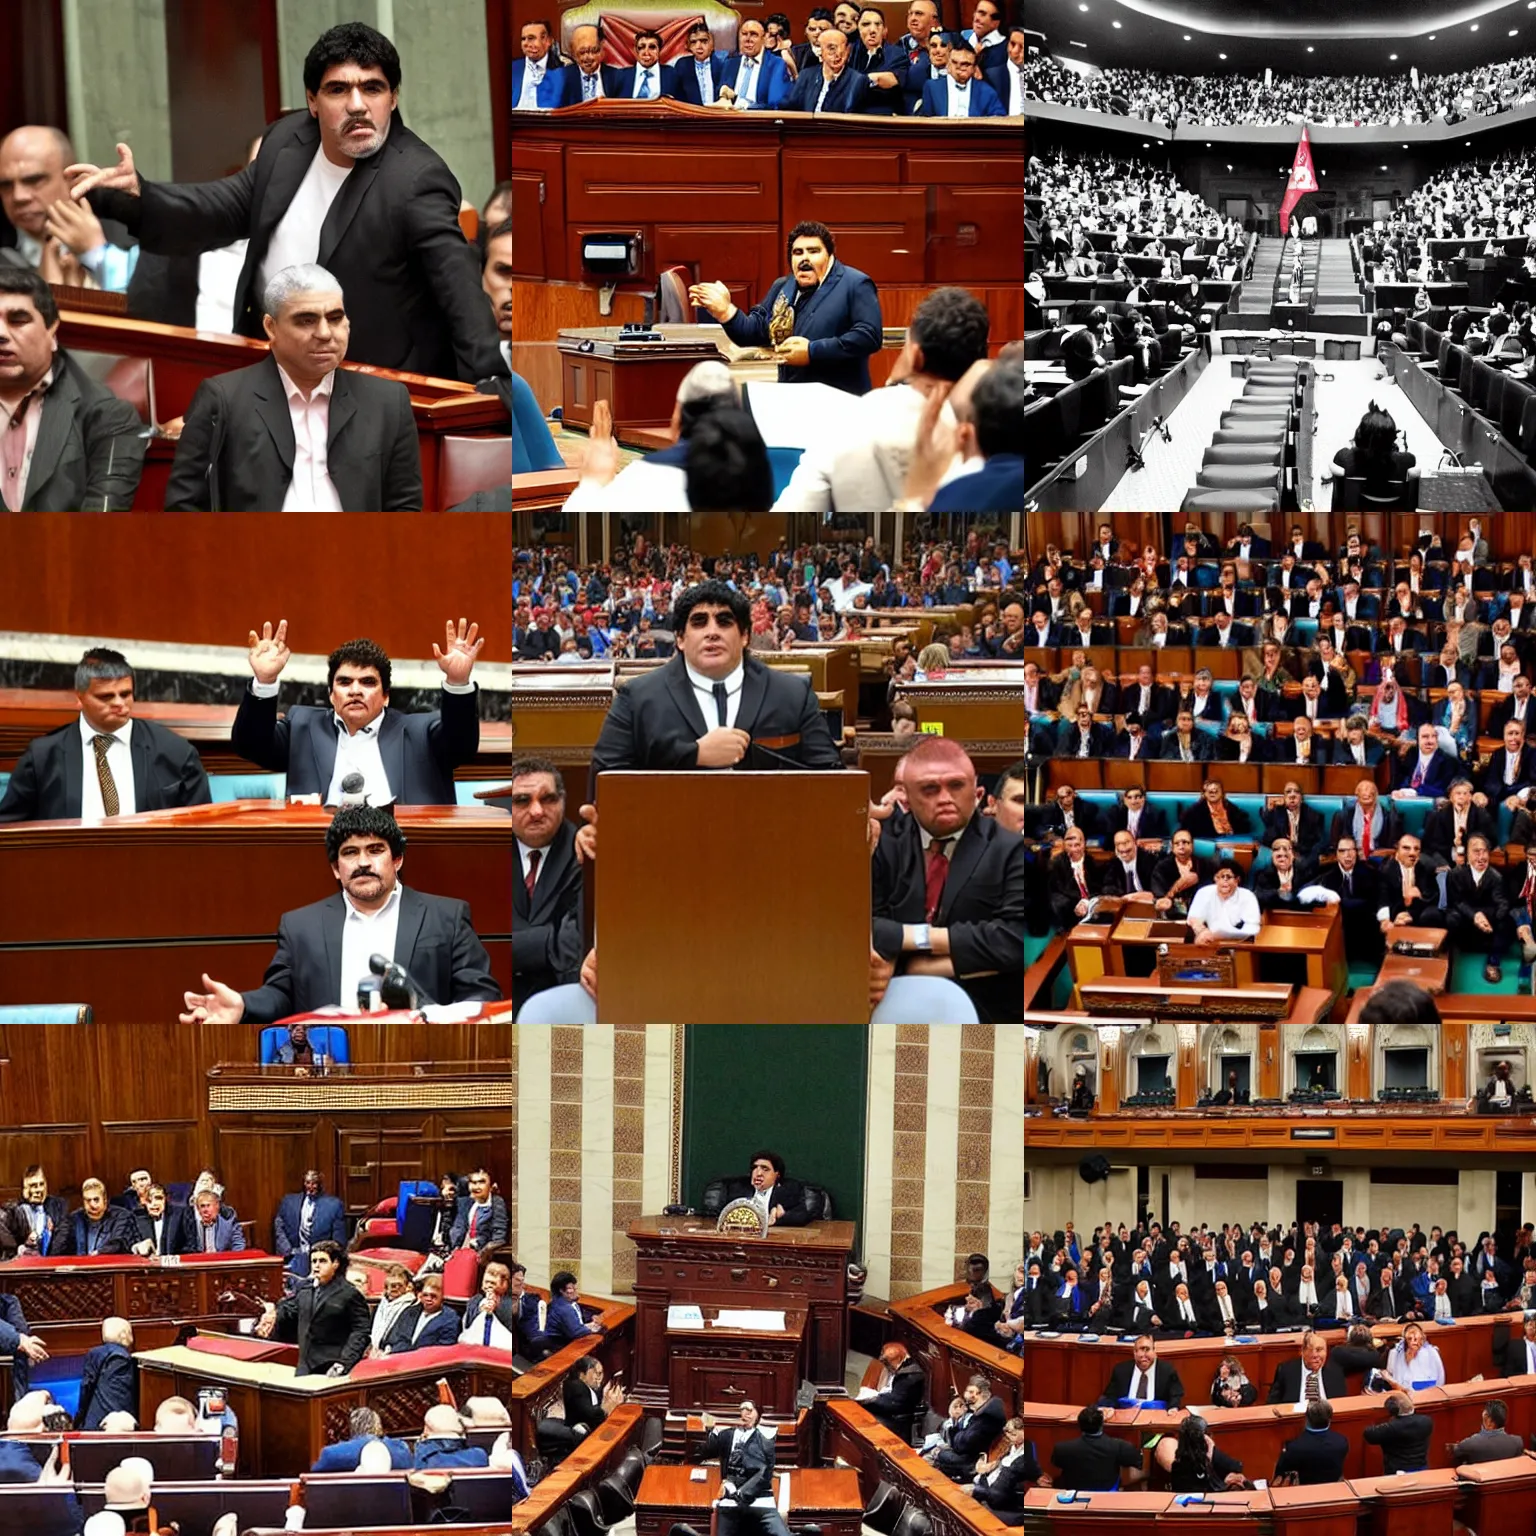 Prompt: Maradona delivering a speech in the House of Representatives